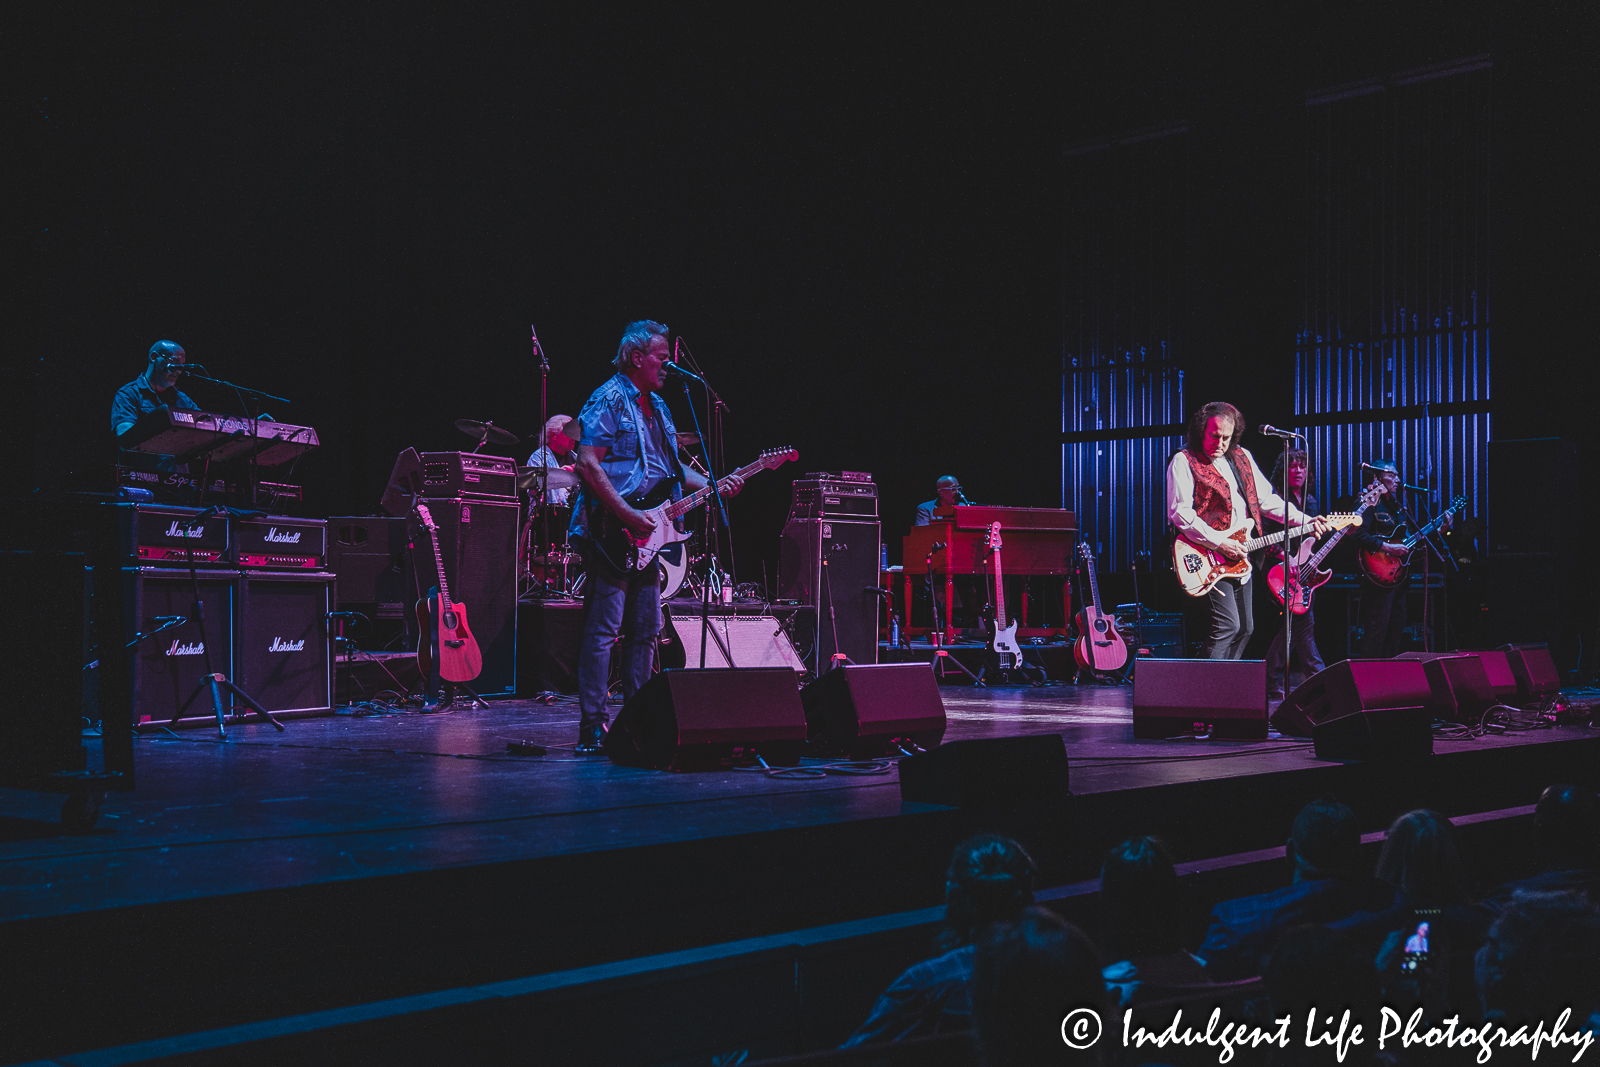 Tommy James & The Shondells performing live in concert at Kauffman Center for the Performing Arts in downtown Kansas City, MO on April 1, 2023.